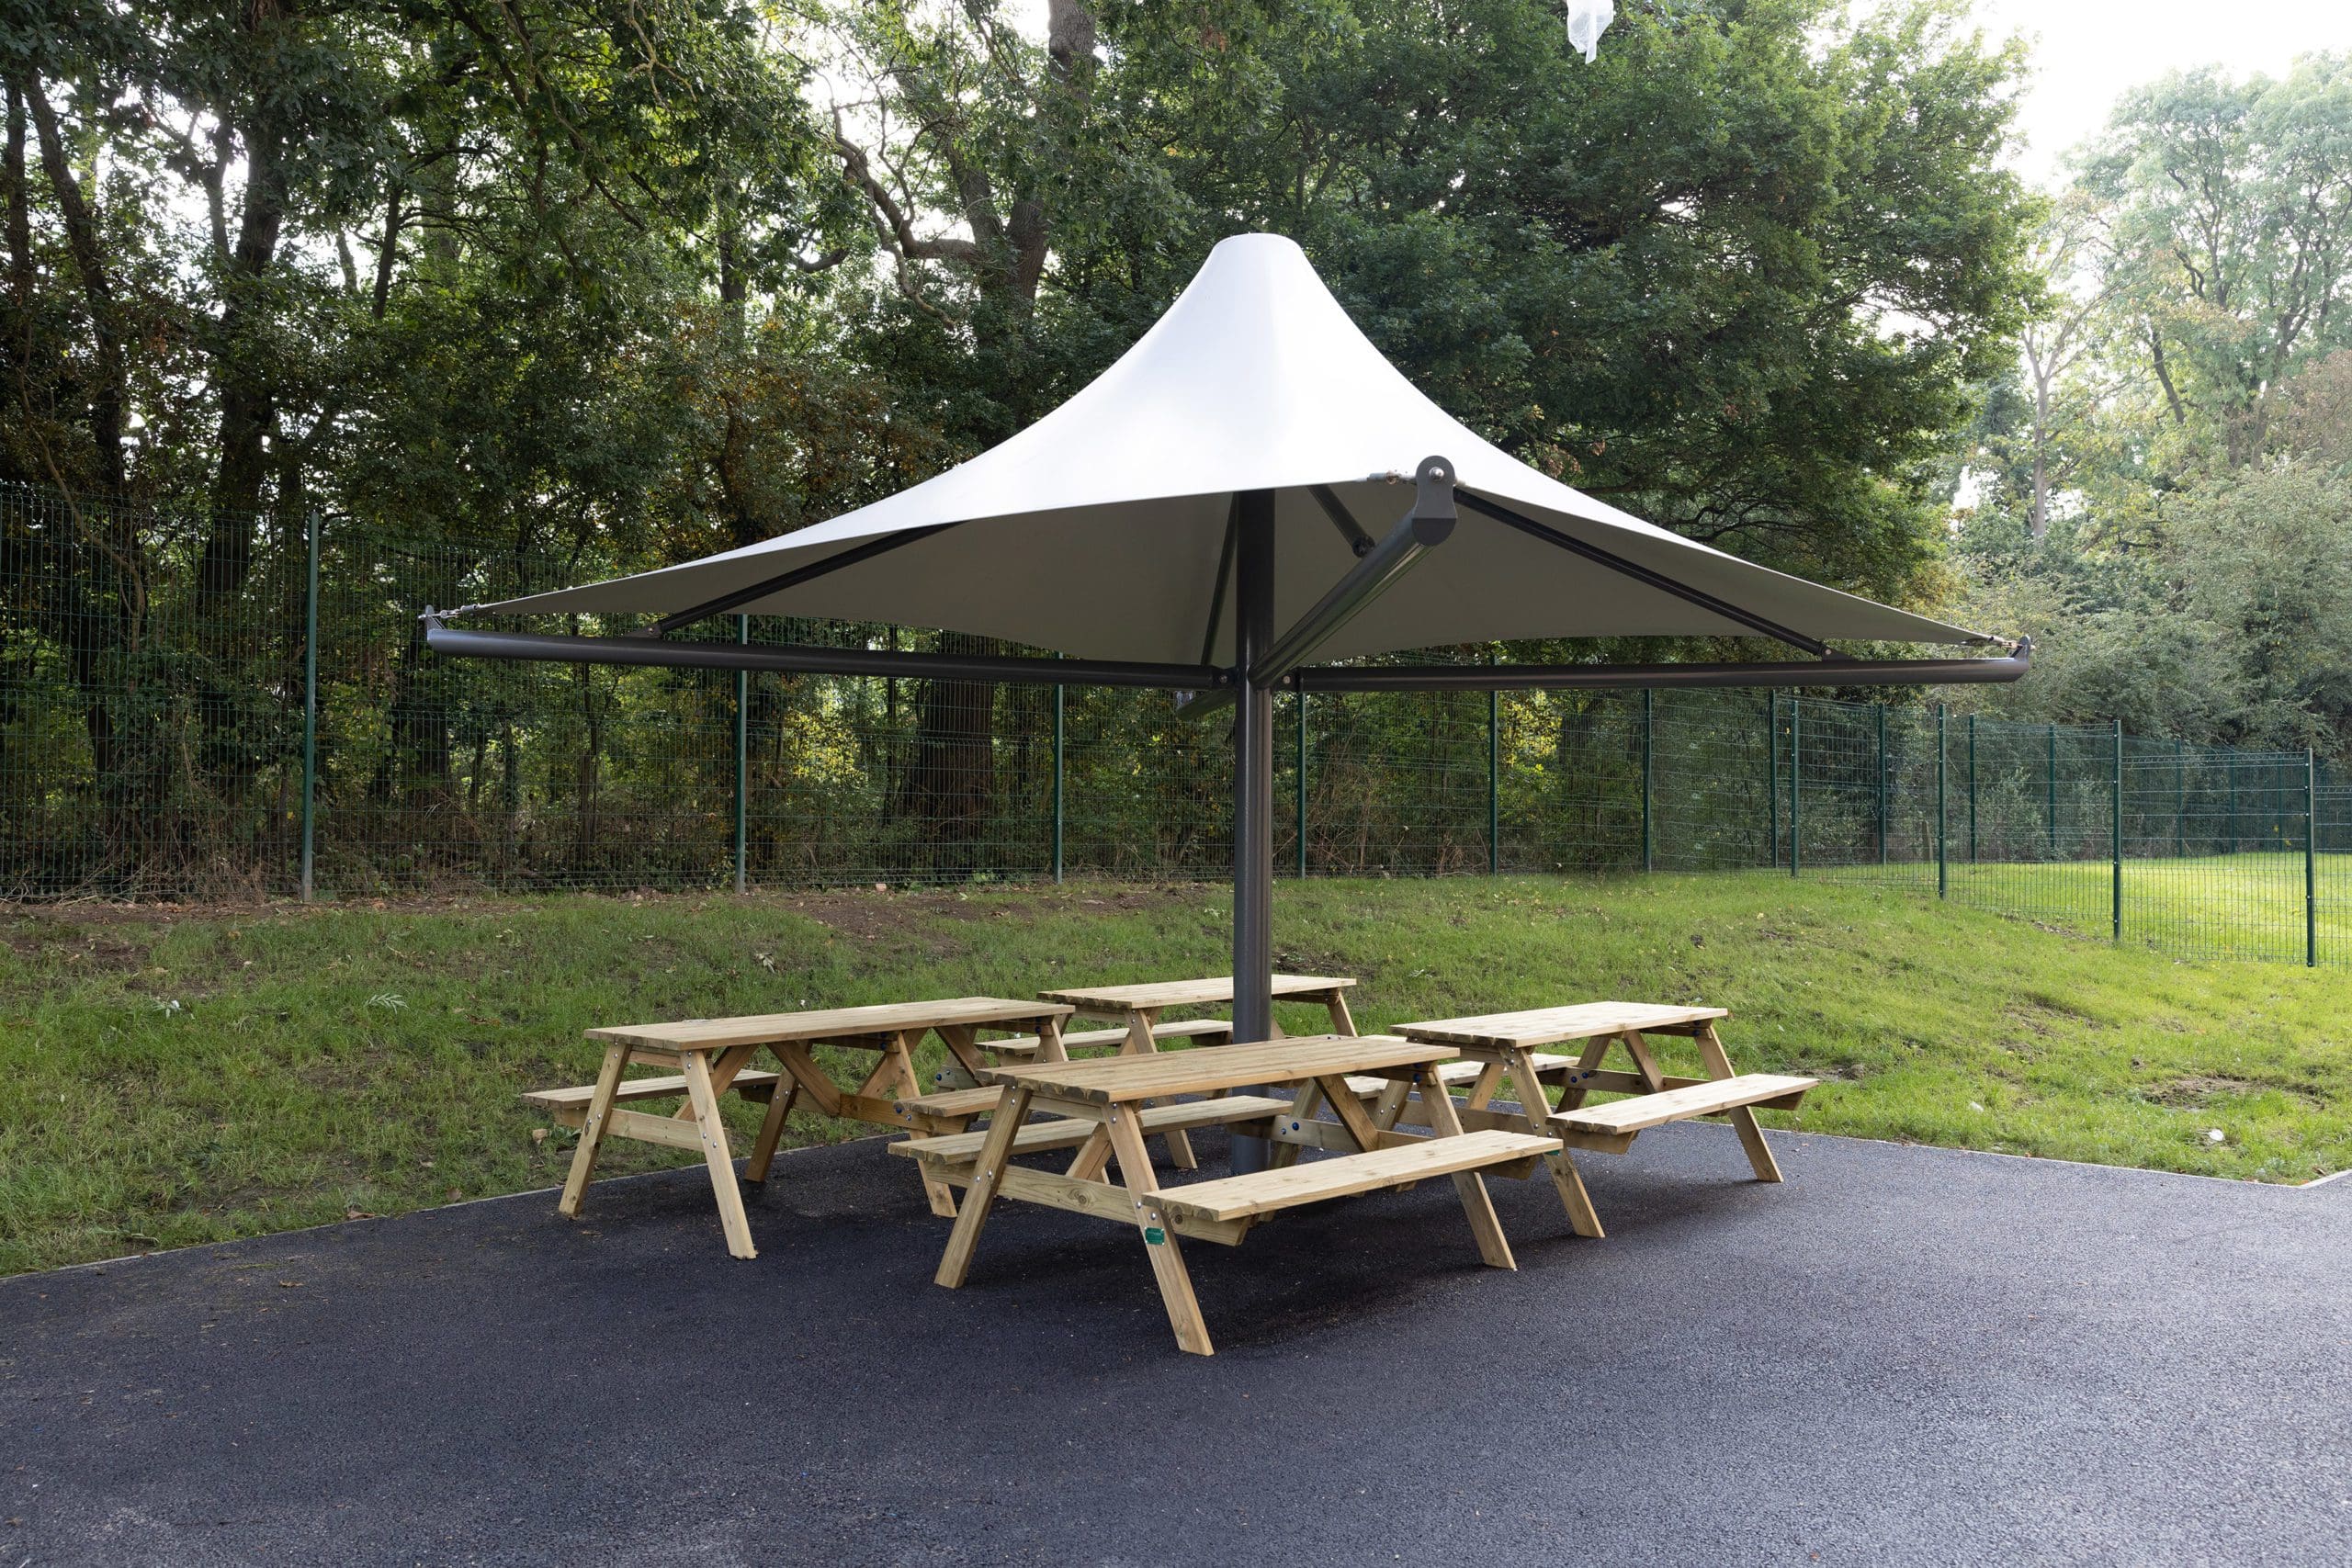 Large outdoor stretch square parasol over 4 wooden picnic tables